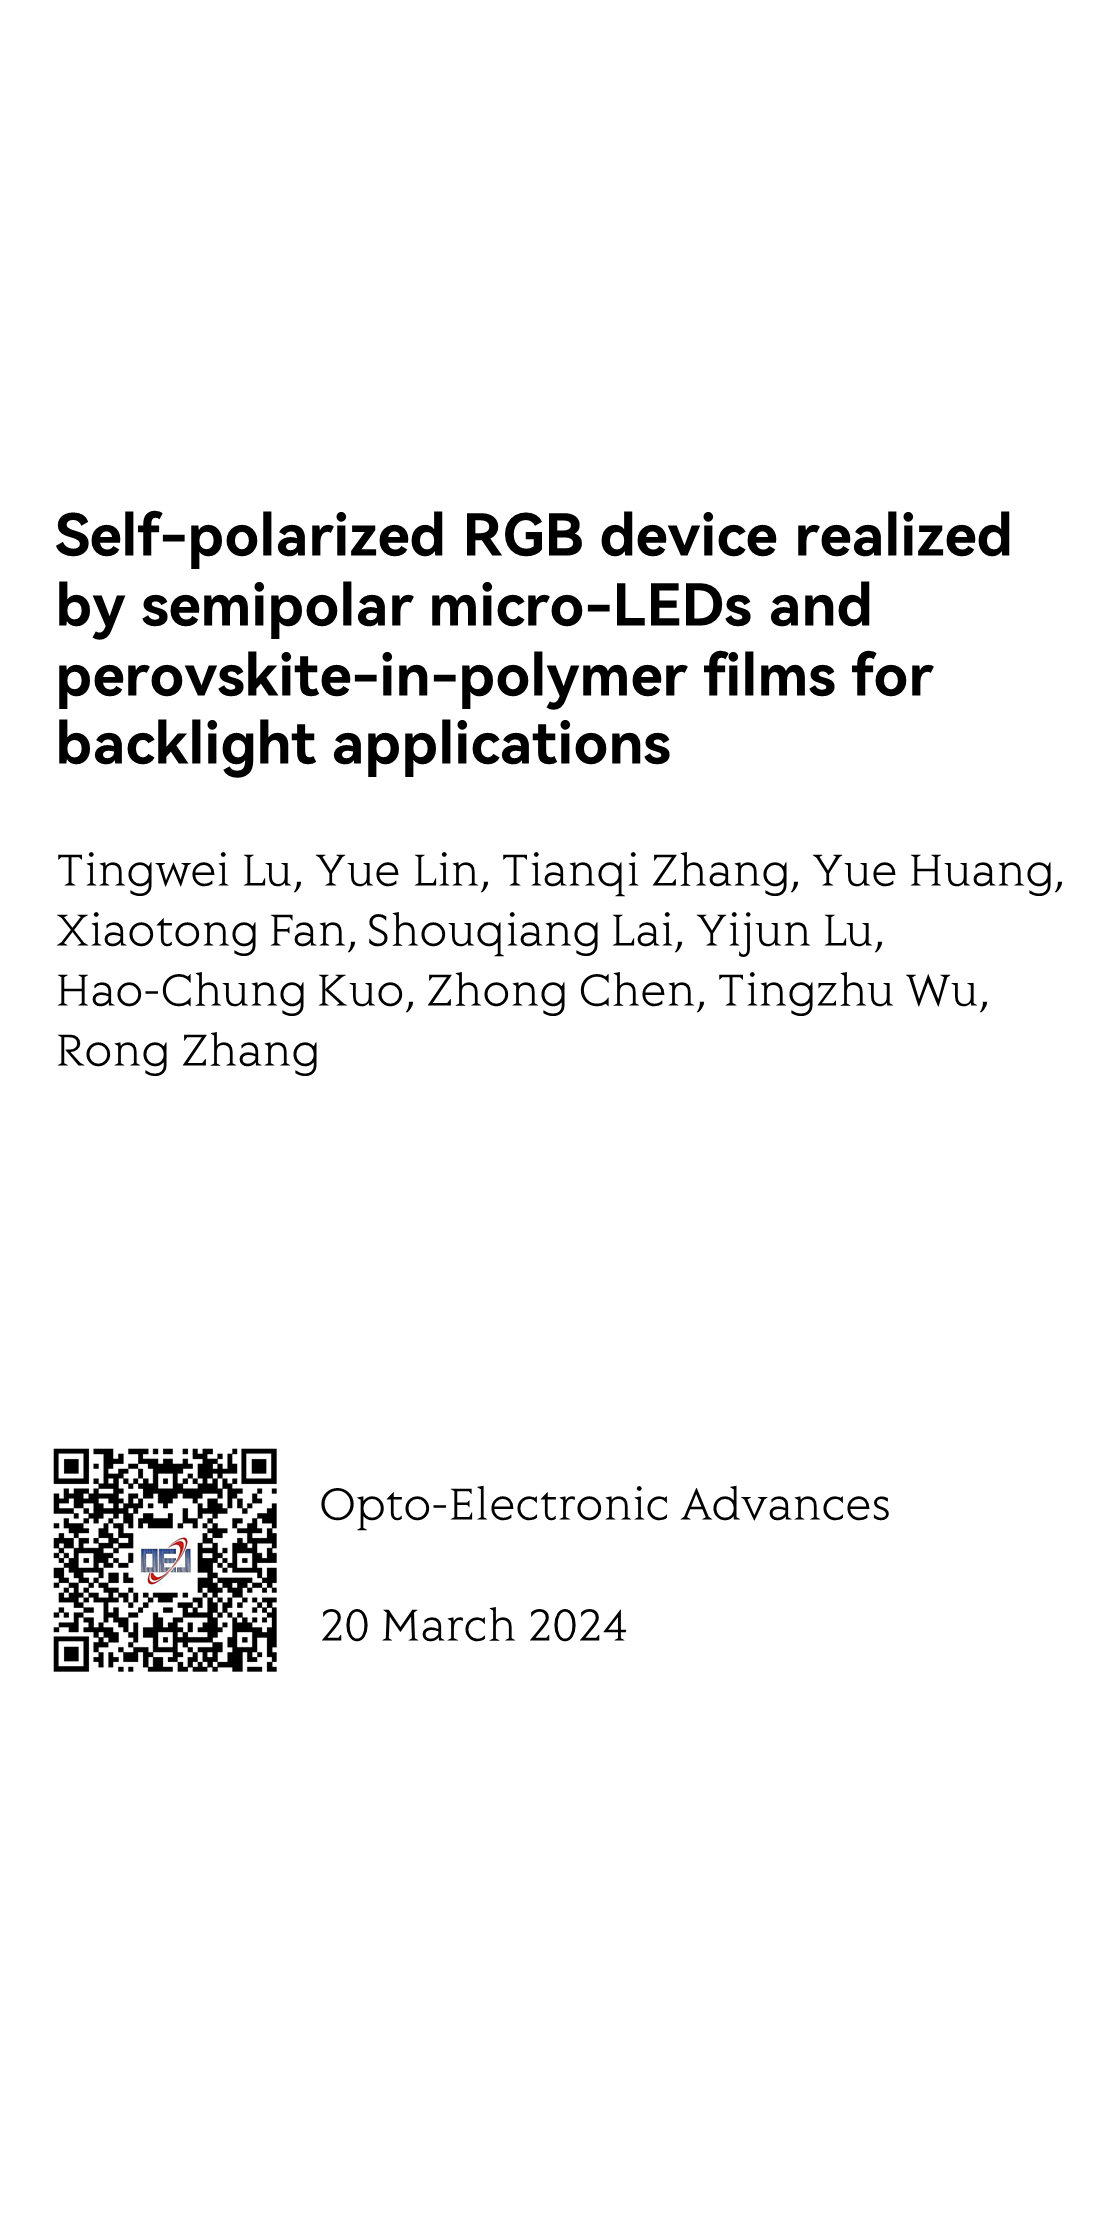 Self-polarized RGB device realized by semipolar micro-LEDs and perovskite-in-polymer films for backlight applications_1